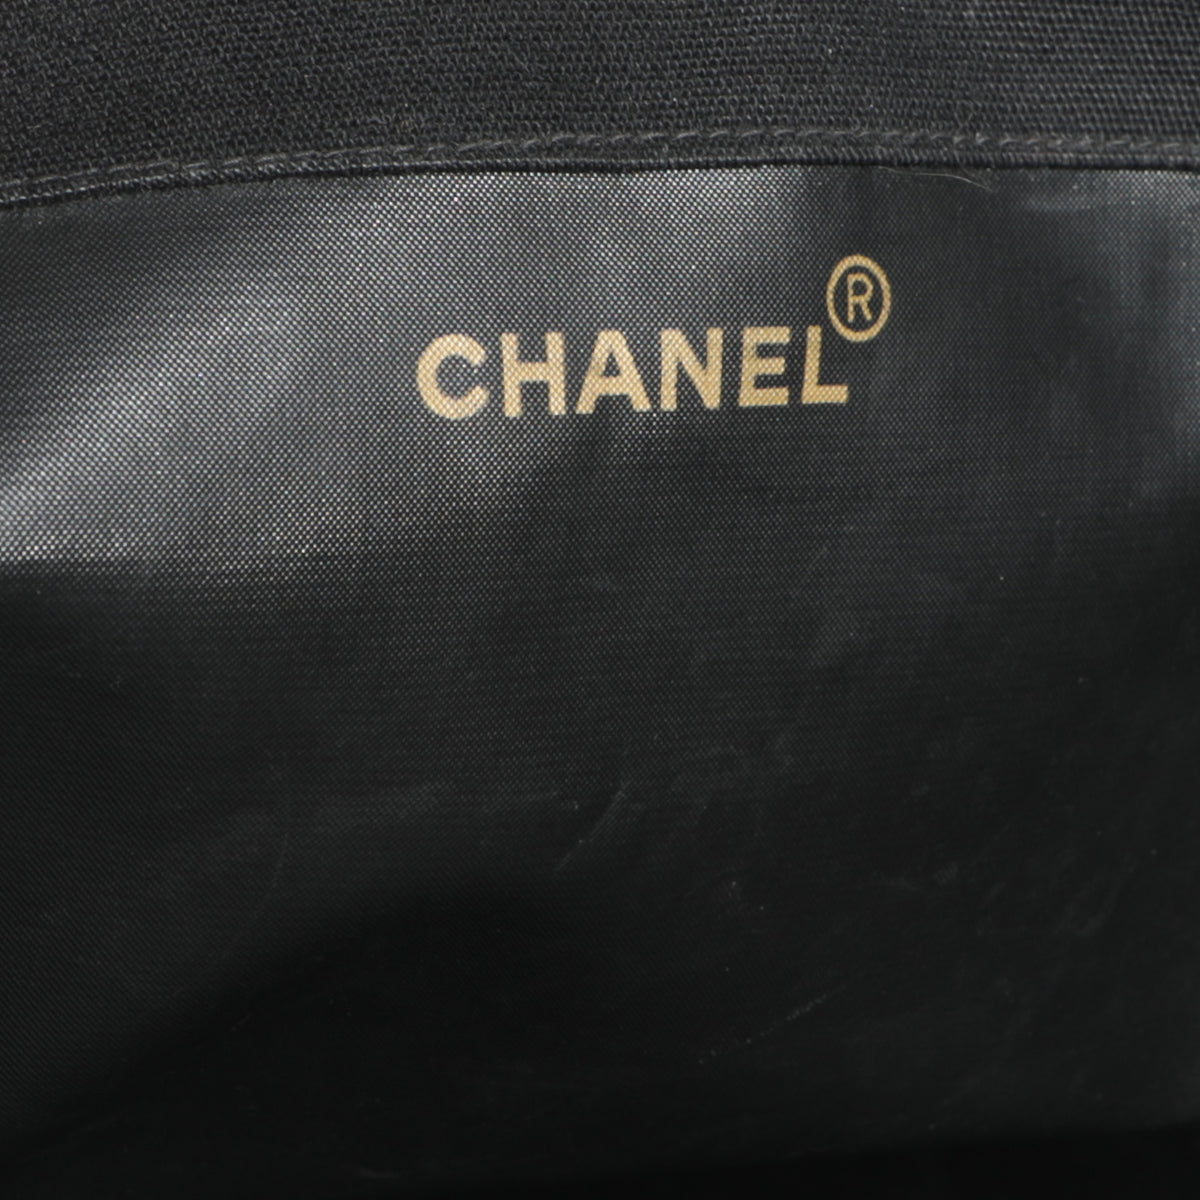 Vintage 1990s Chanel Canvas Oversized Shopping Tote Bag